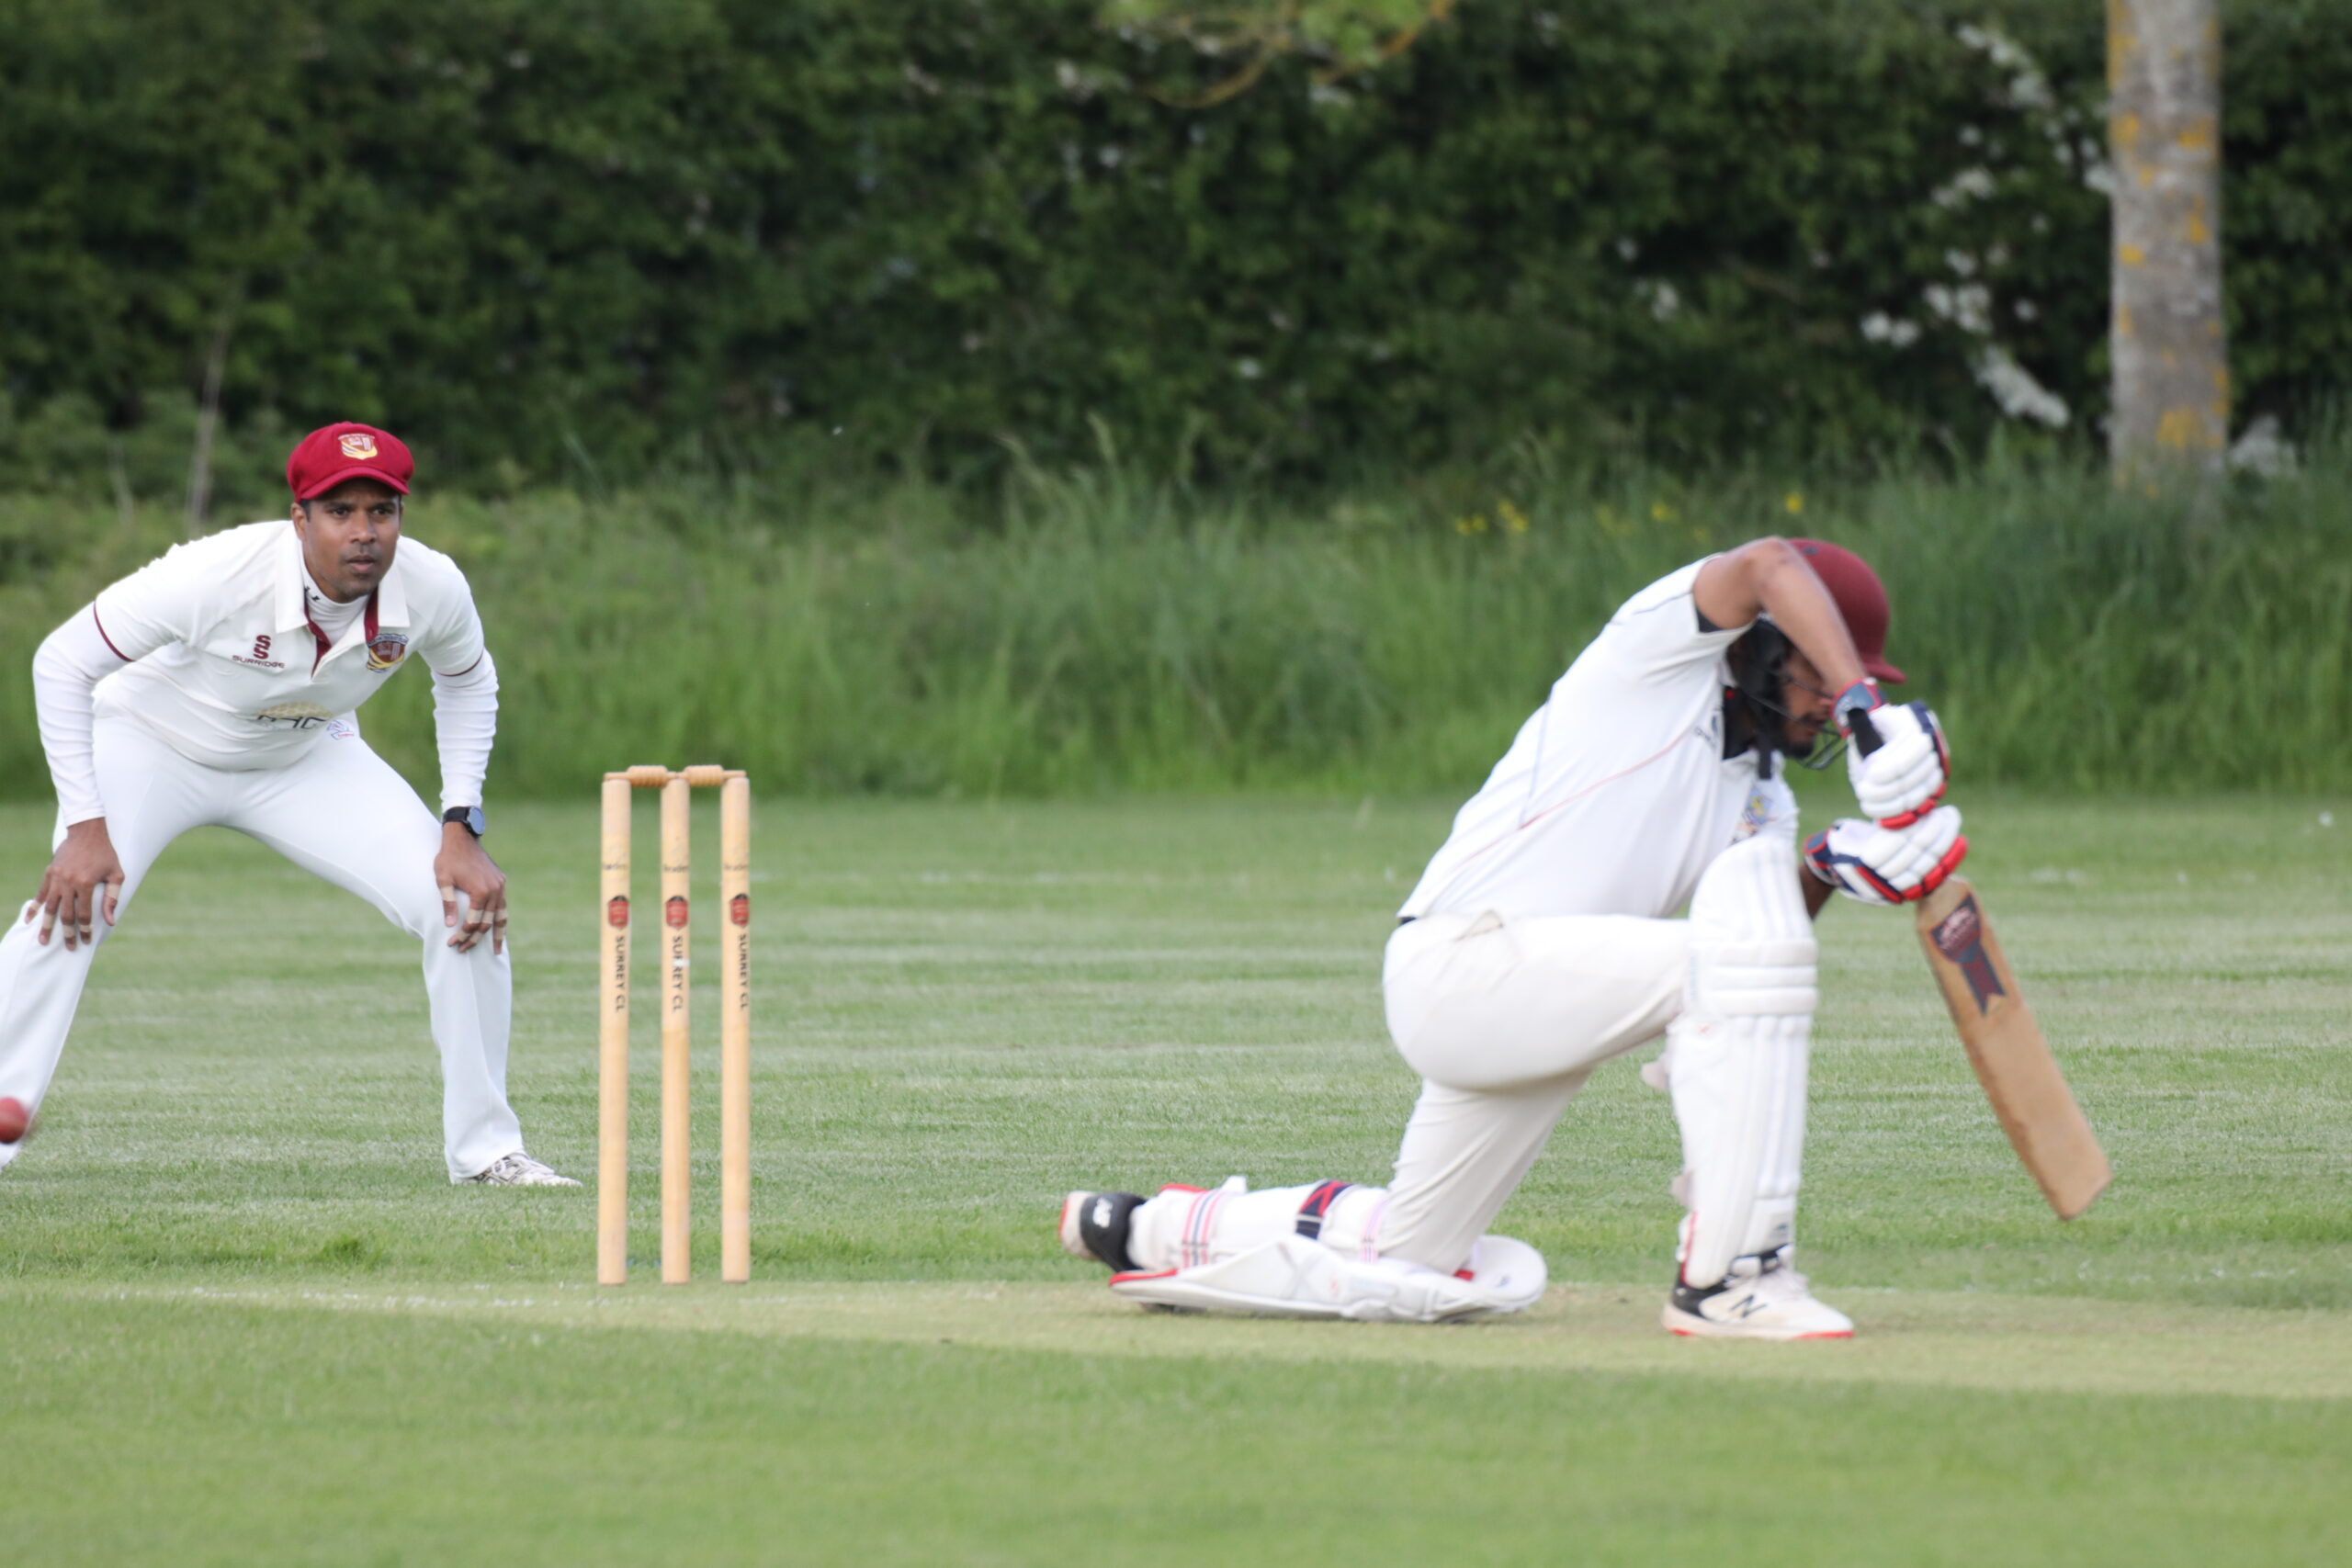 Guildford City Cricket Youth Project 1st XI captain Rohail Khan batting